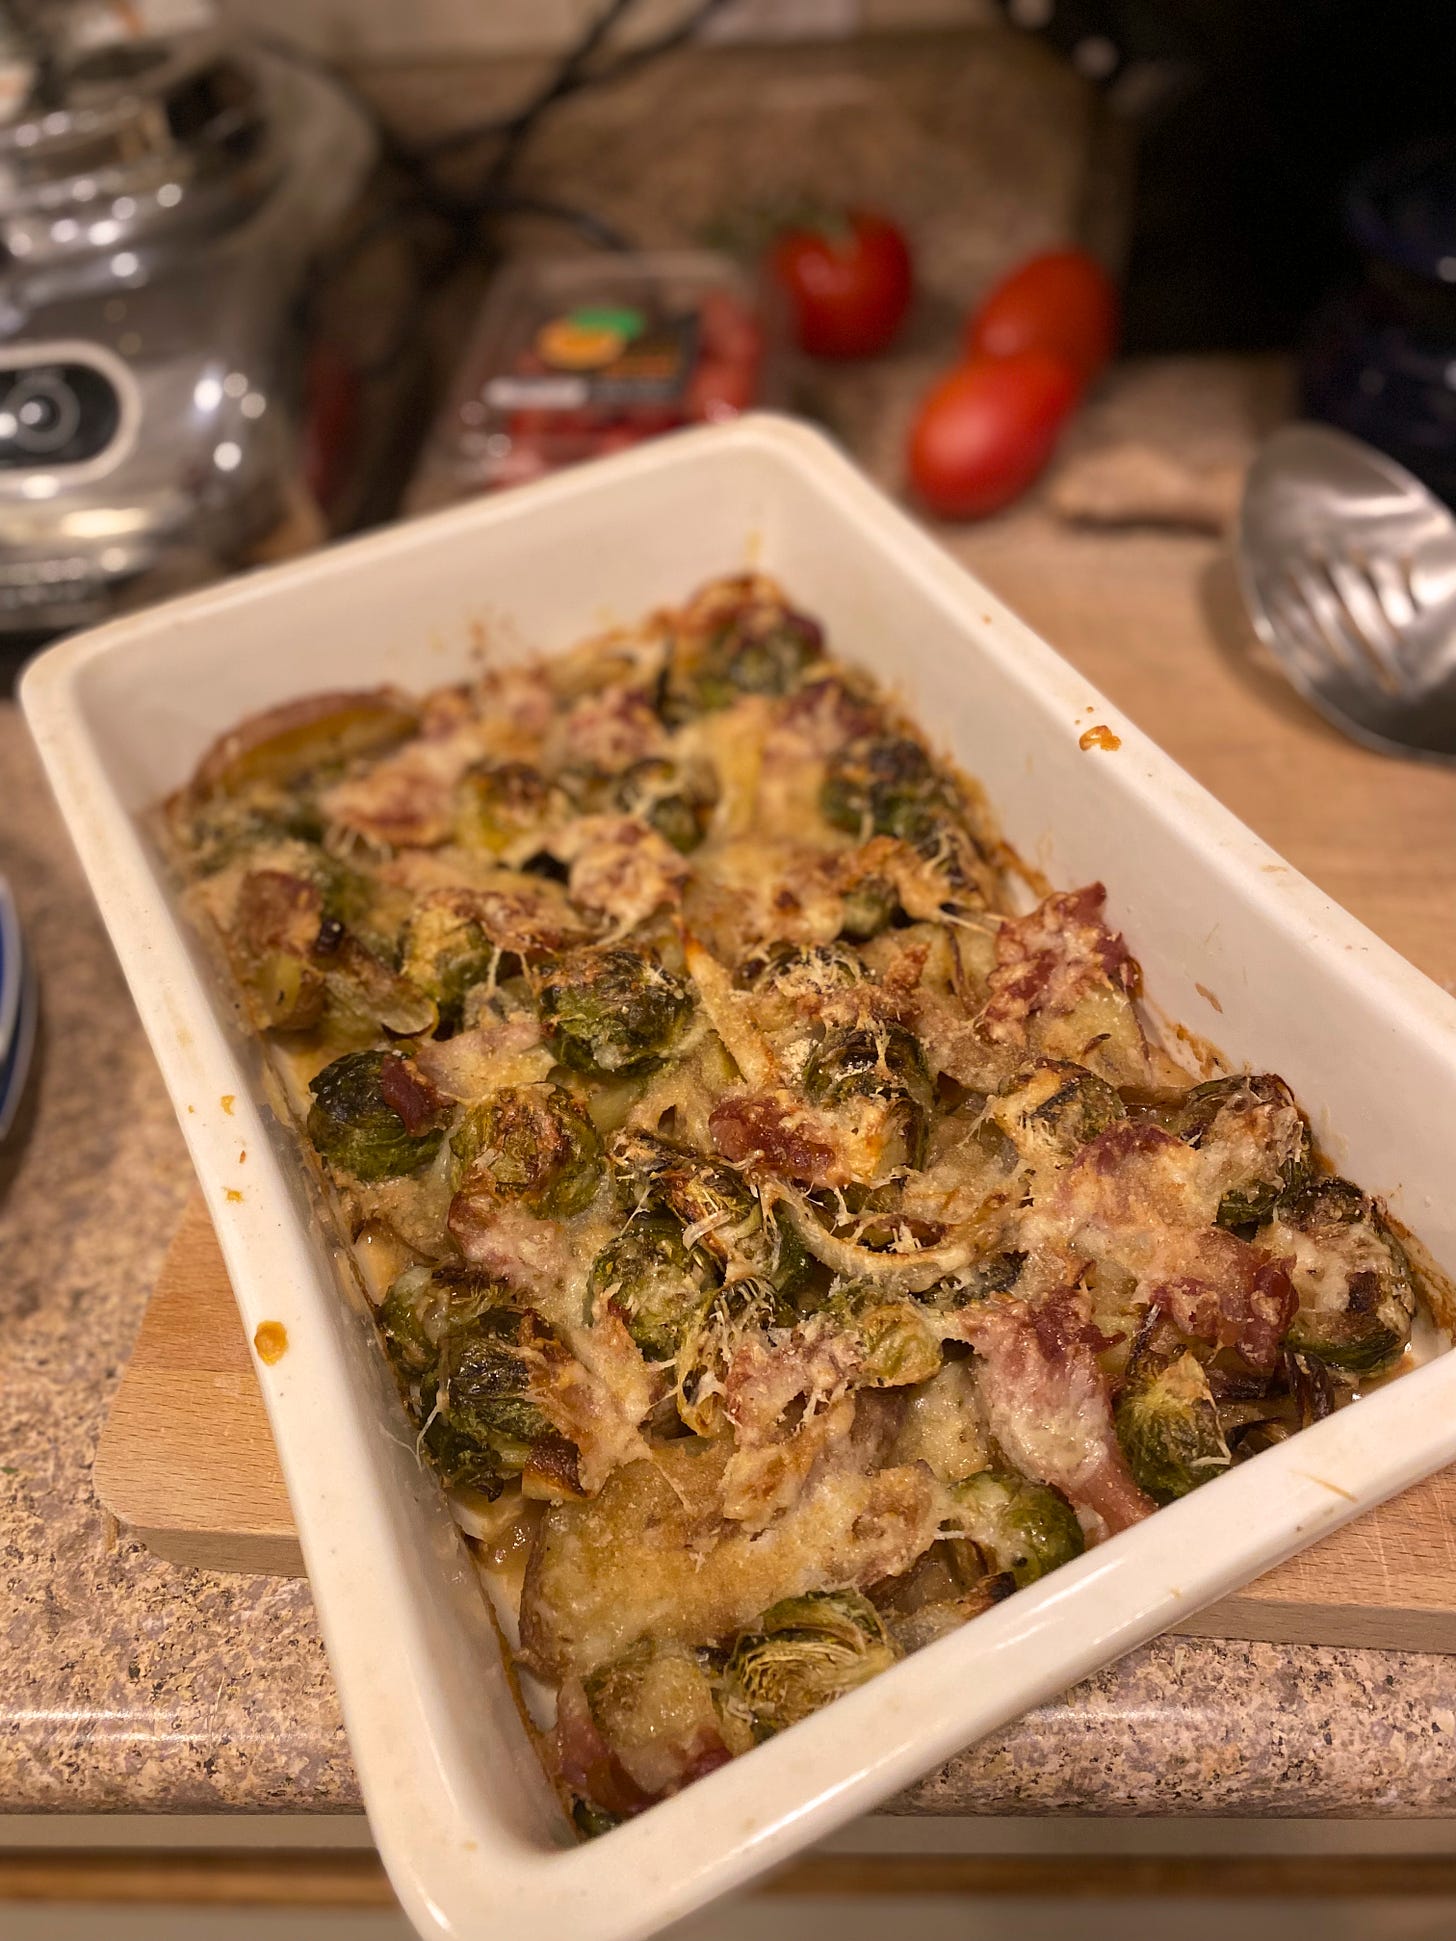 A white rectangular baking dish of the gratin described above. The cheese is browned in places and crisp pieces of prosciutto are visible throughout.